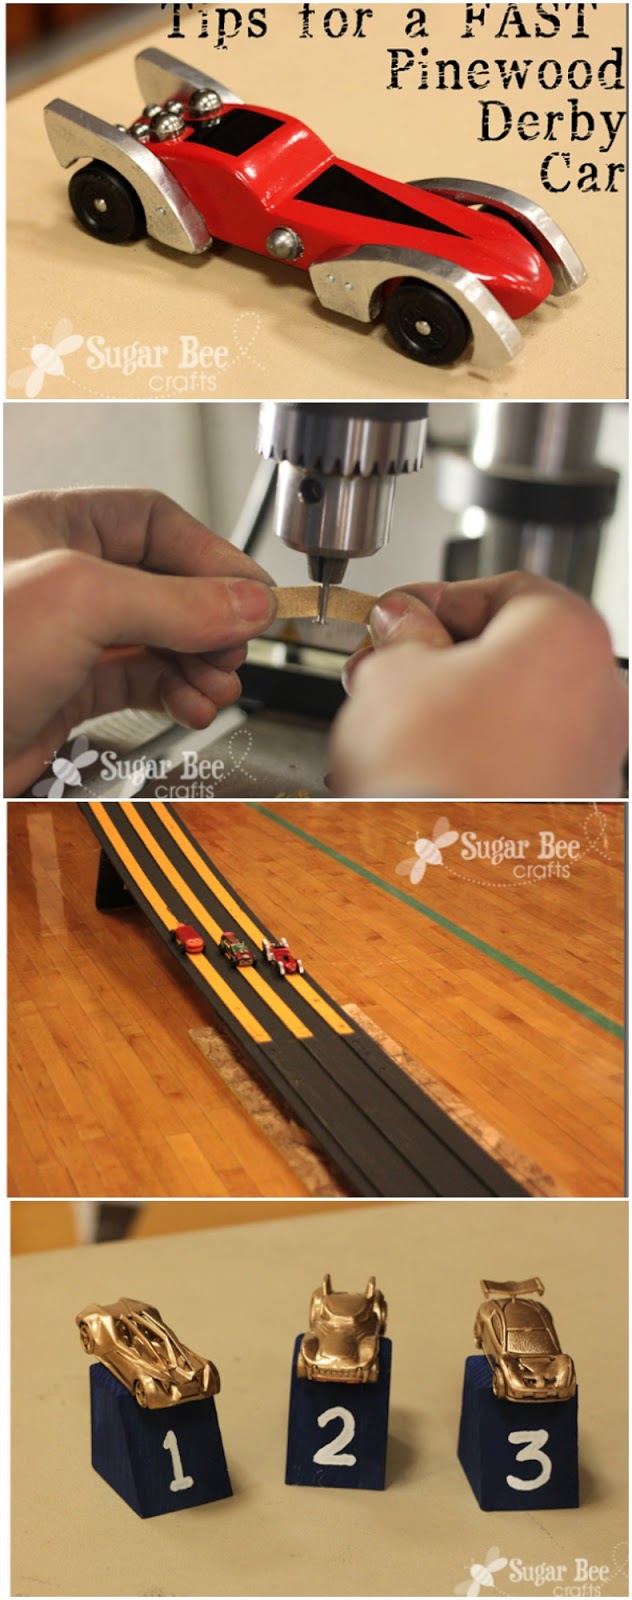 Pinewood Derby Tips & Tricks | How to Make Your Car Faster (Wheels